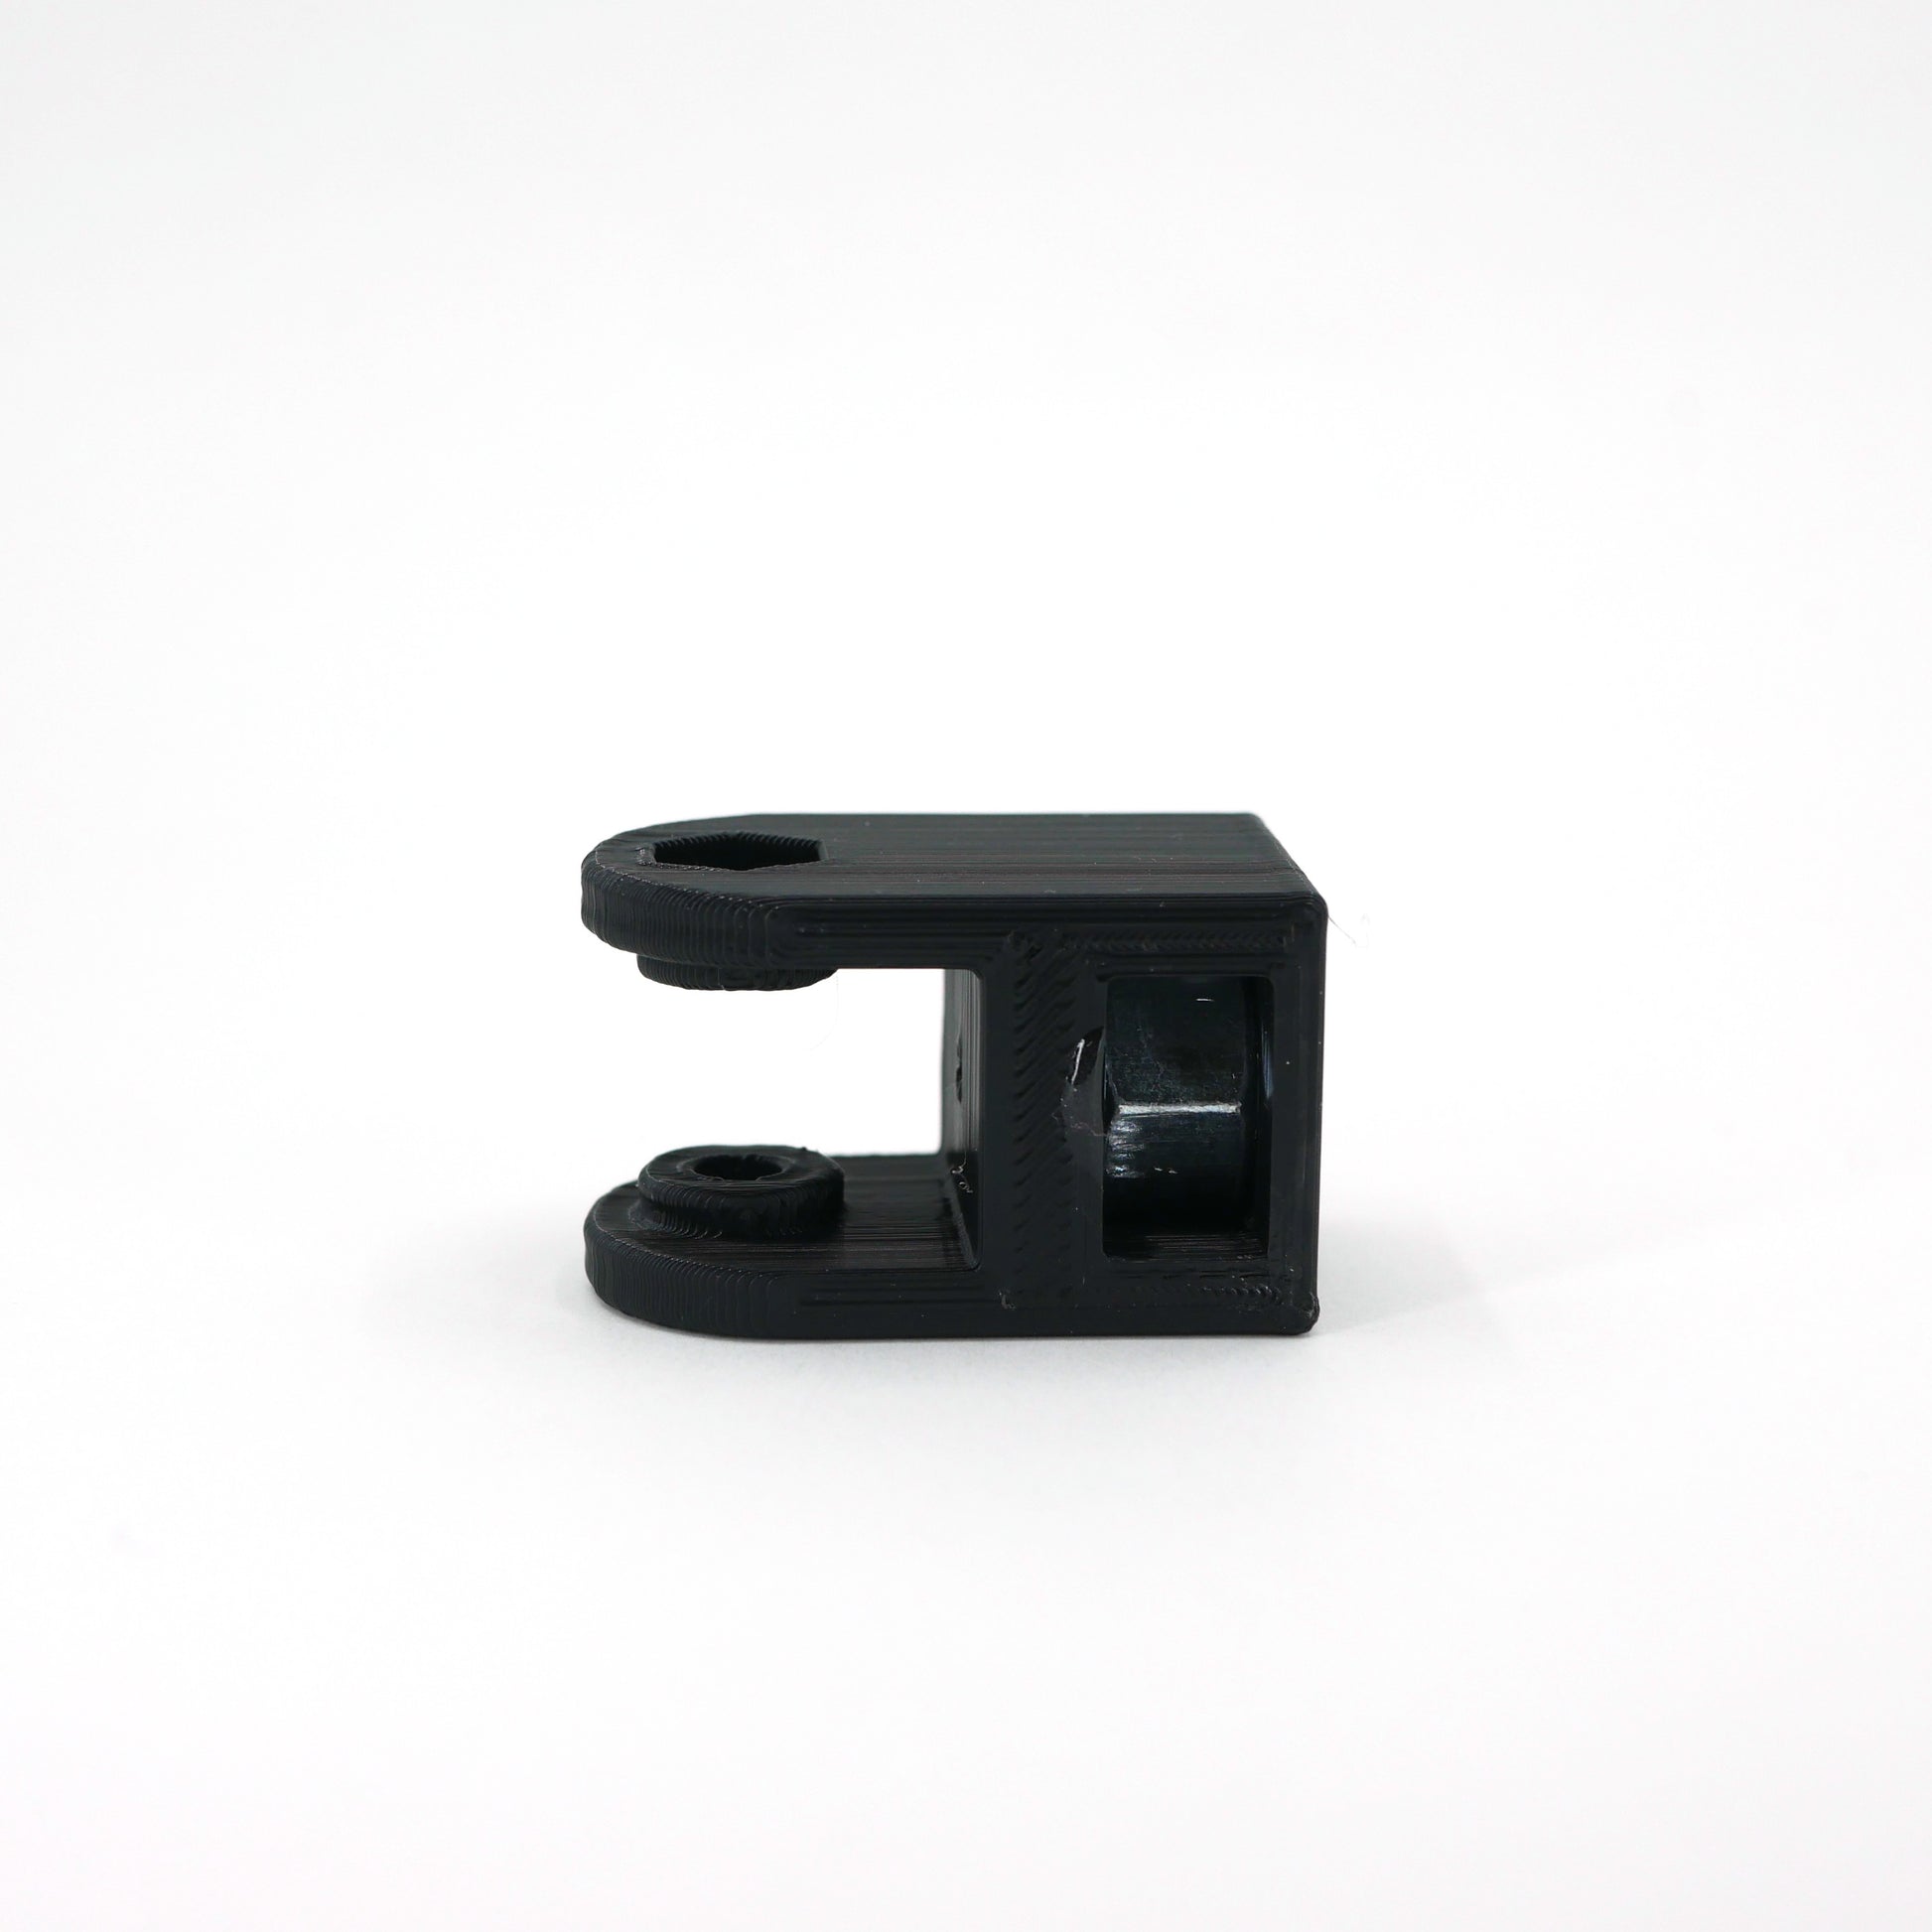 The front of a black HyperX SoloCast microphone mount adapter.